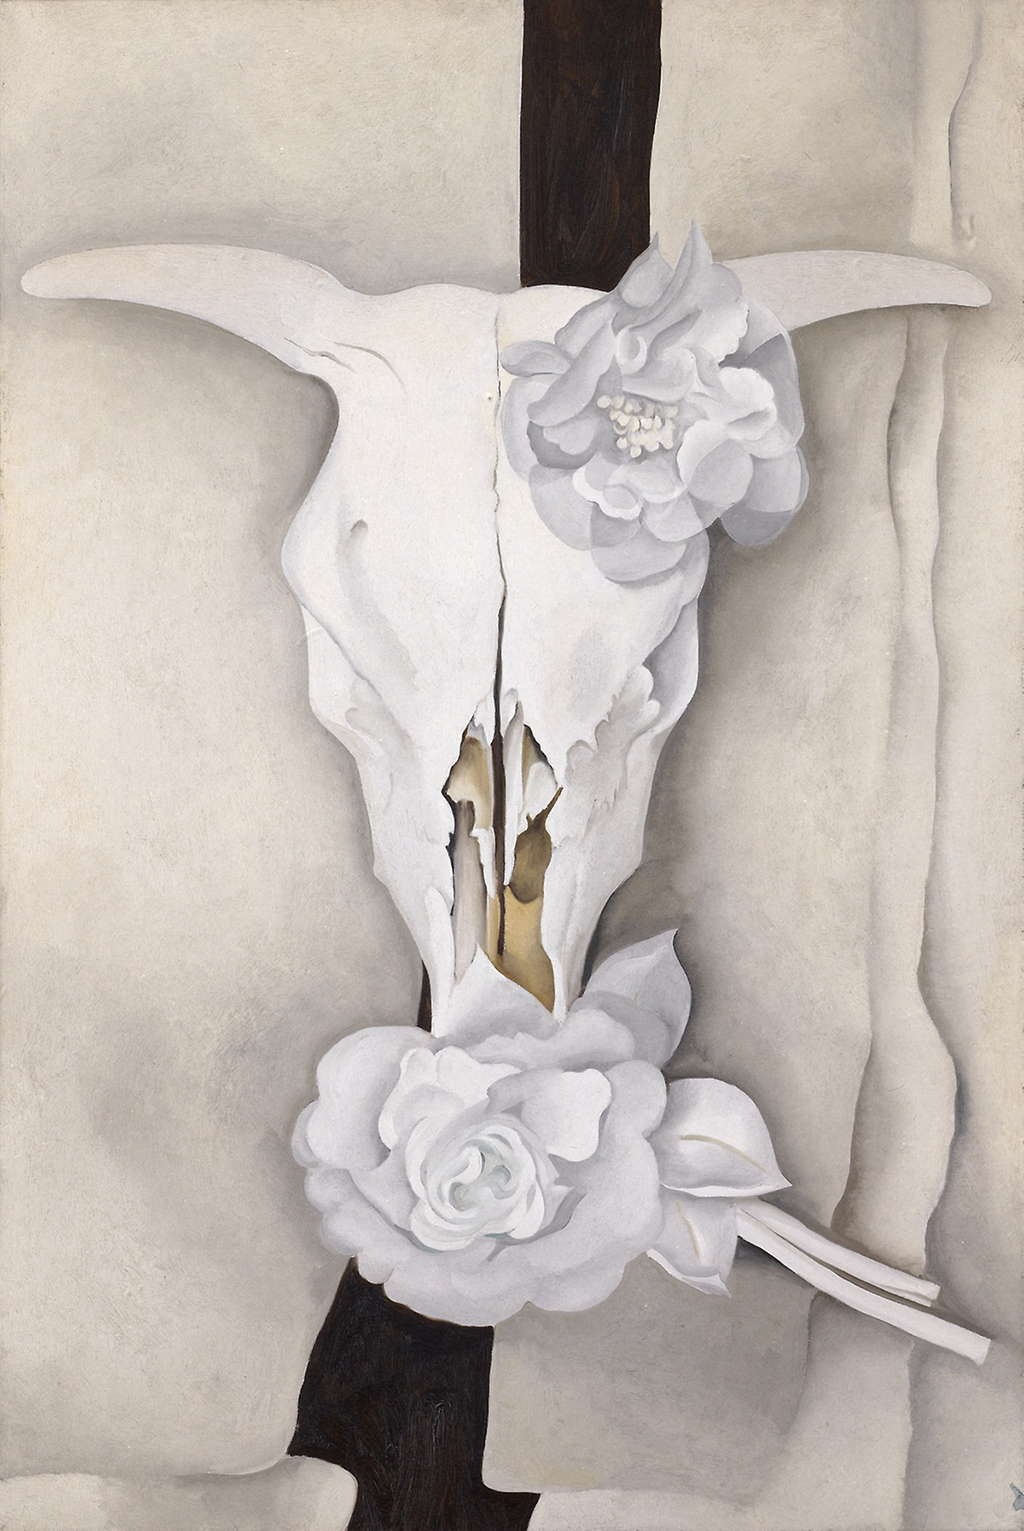 Cow's Skull with Calico Roses in Detail Georgia O'Keeffe